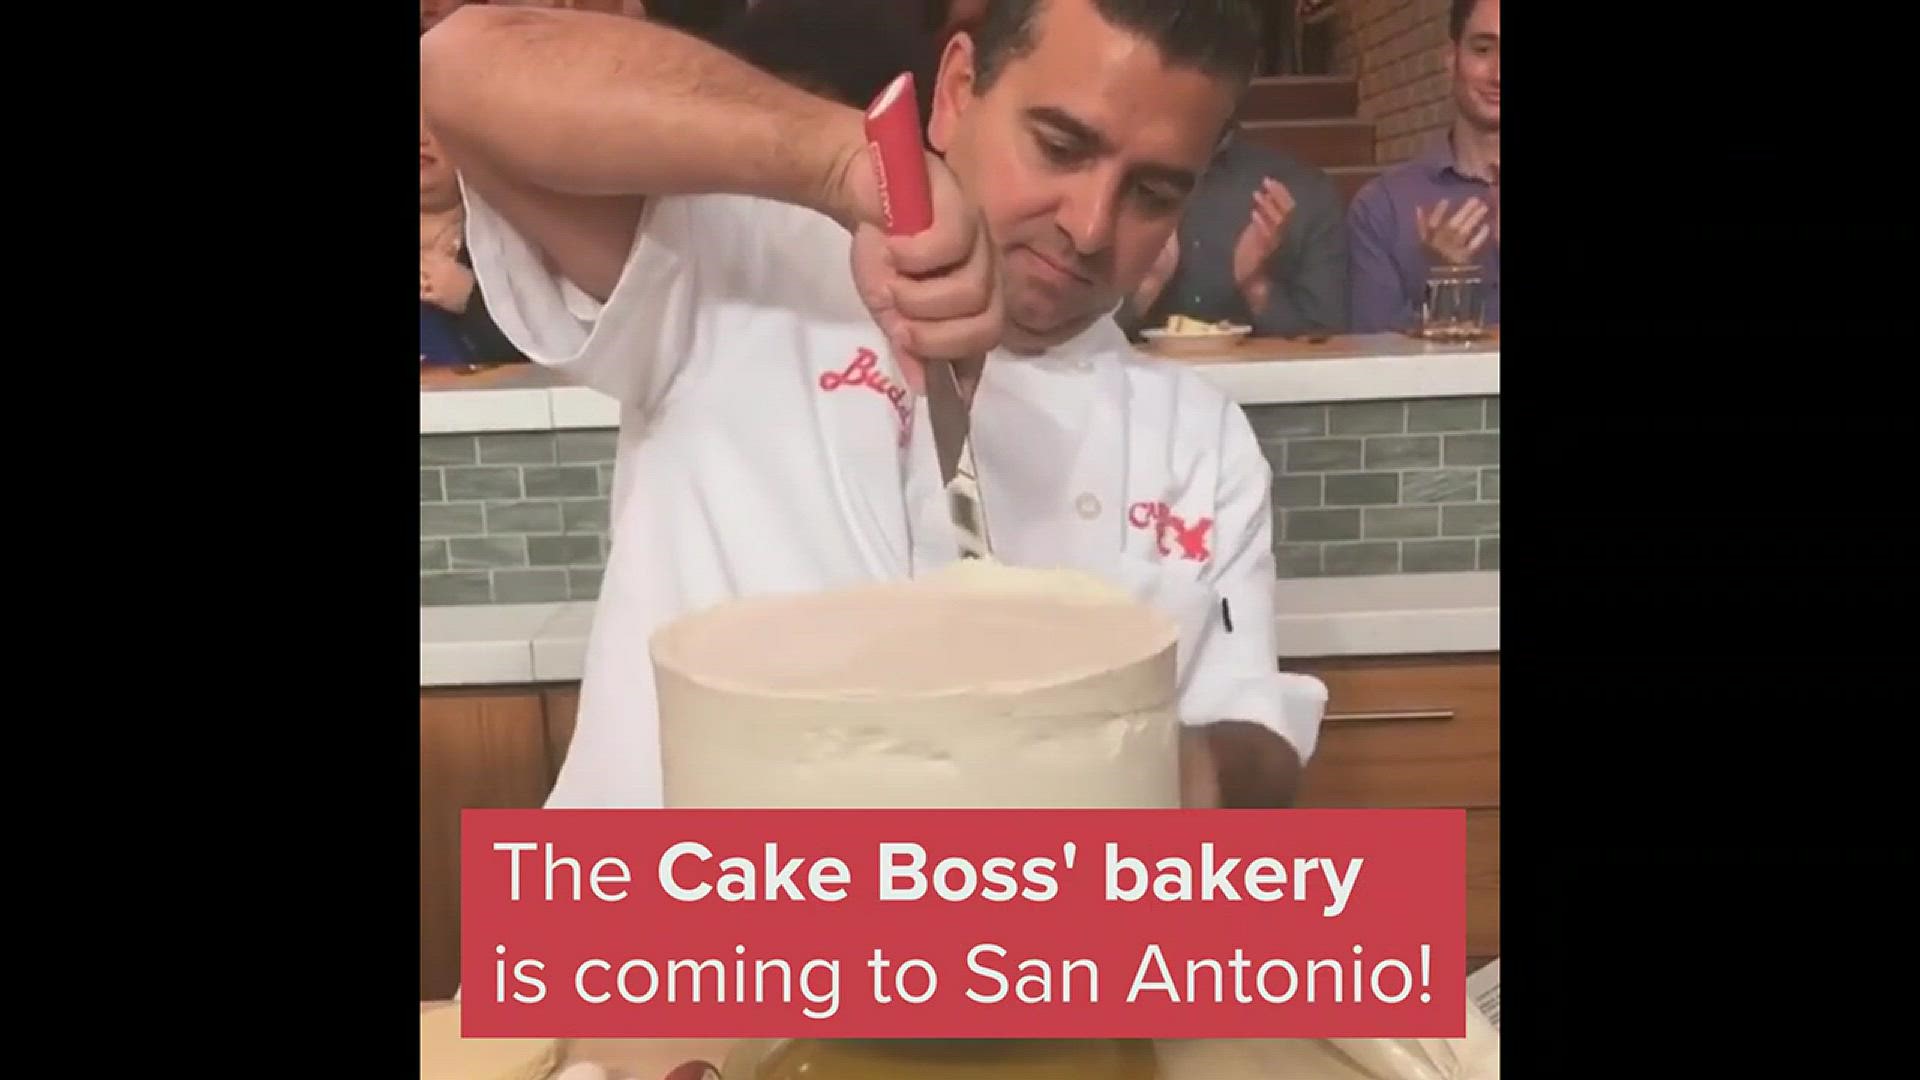 Oreo conchas aren't the only unique treat at this San Antonio bakery